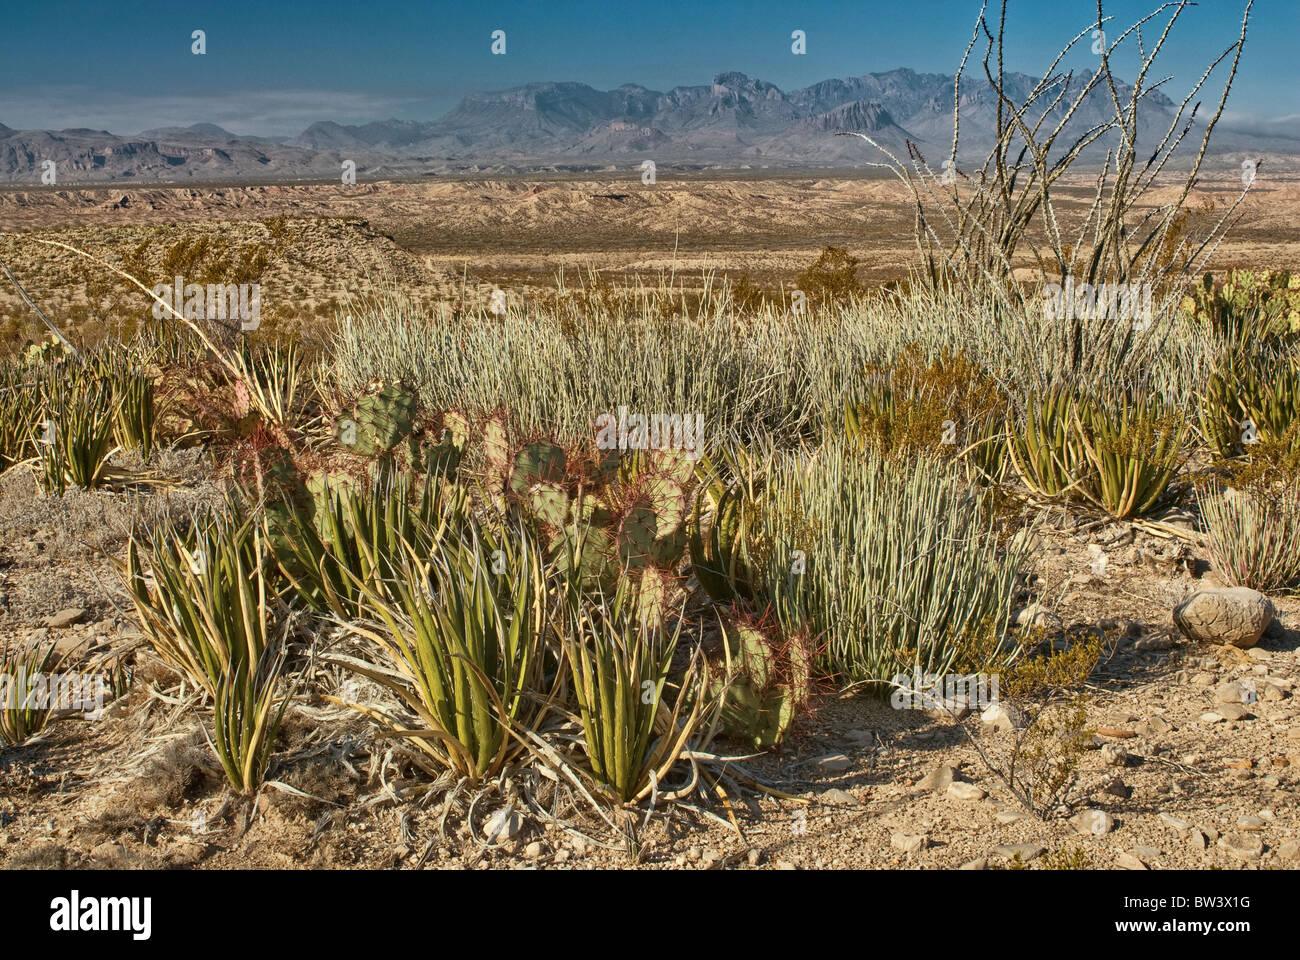 Lechuguilla agaves, candelillas, prickly pears and ocotillos with Chisos Mountains in dist. Big Bend National Park, Texas, USA Stock Photo